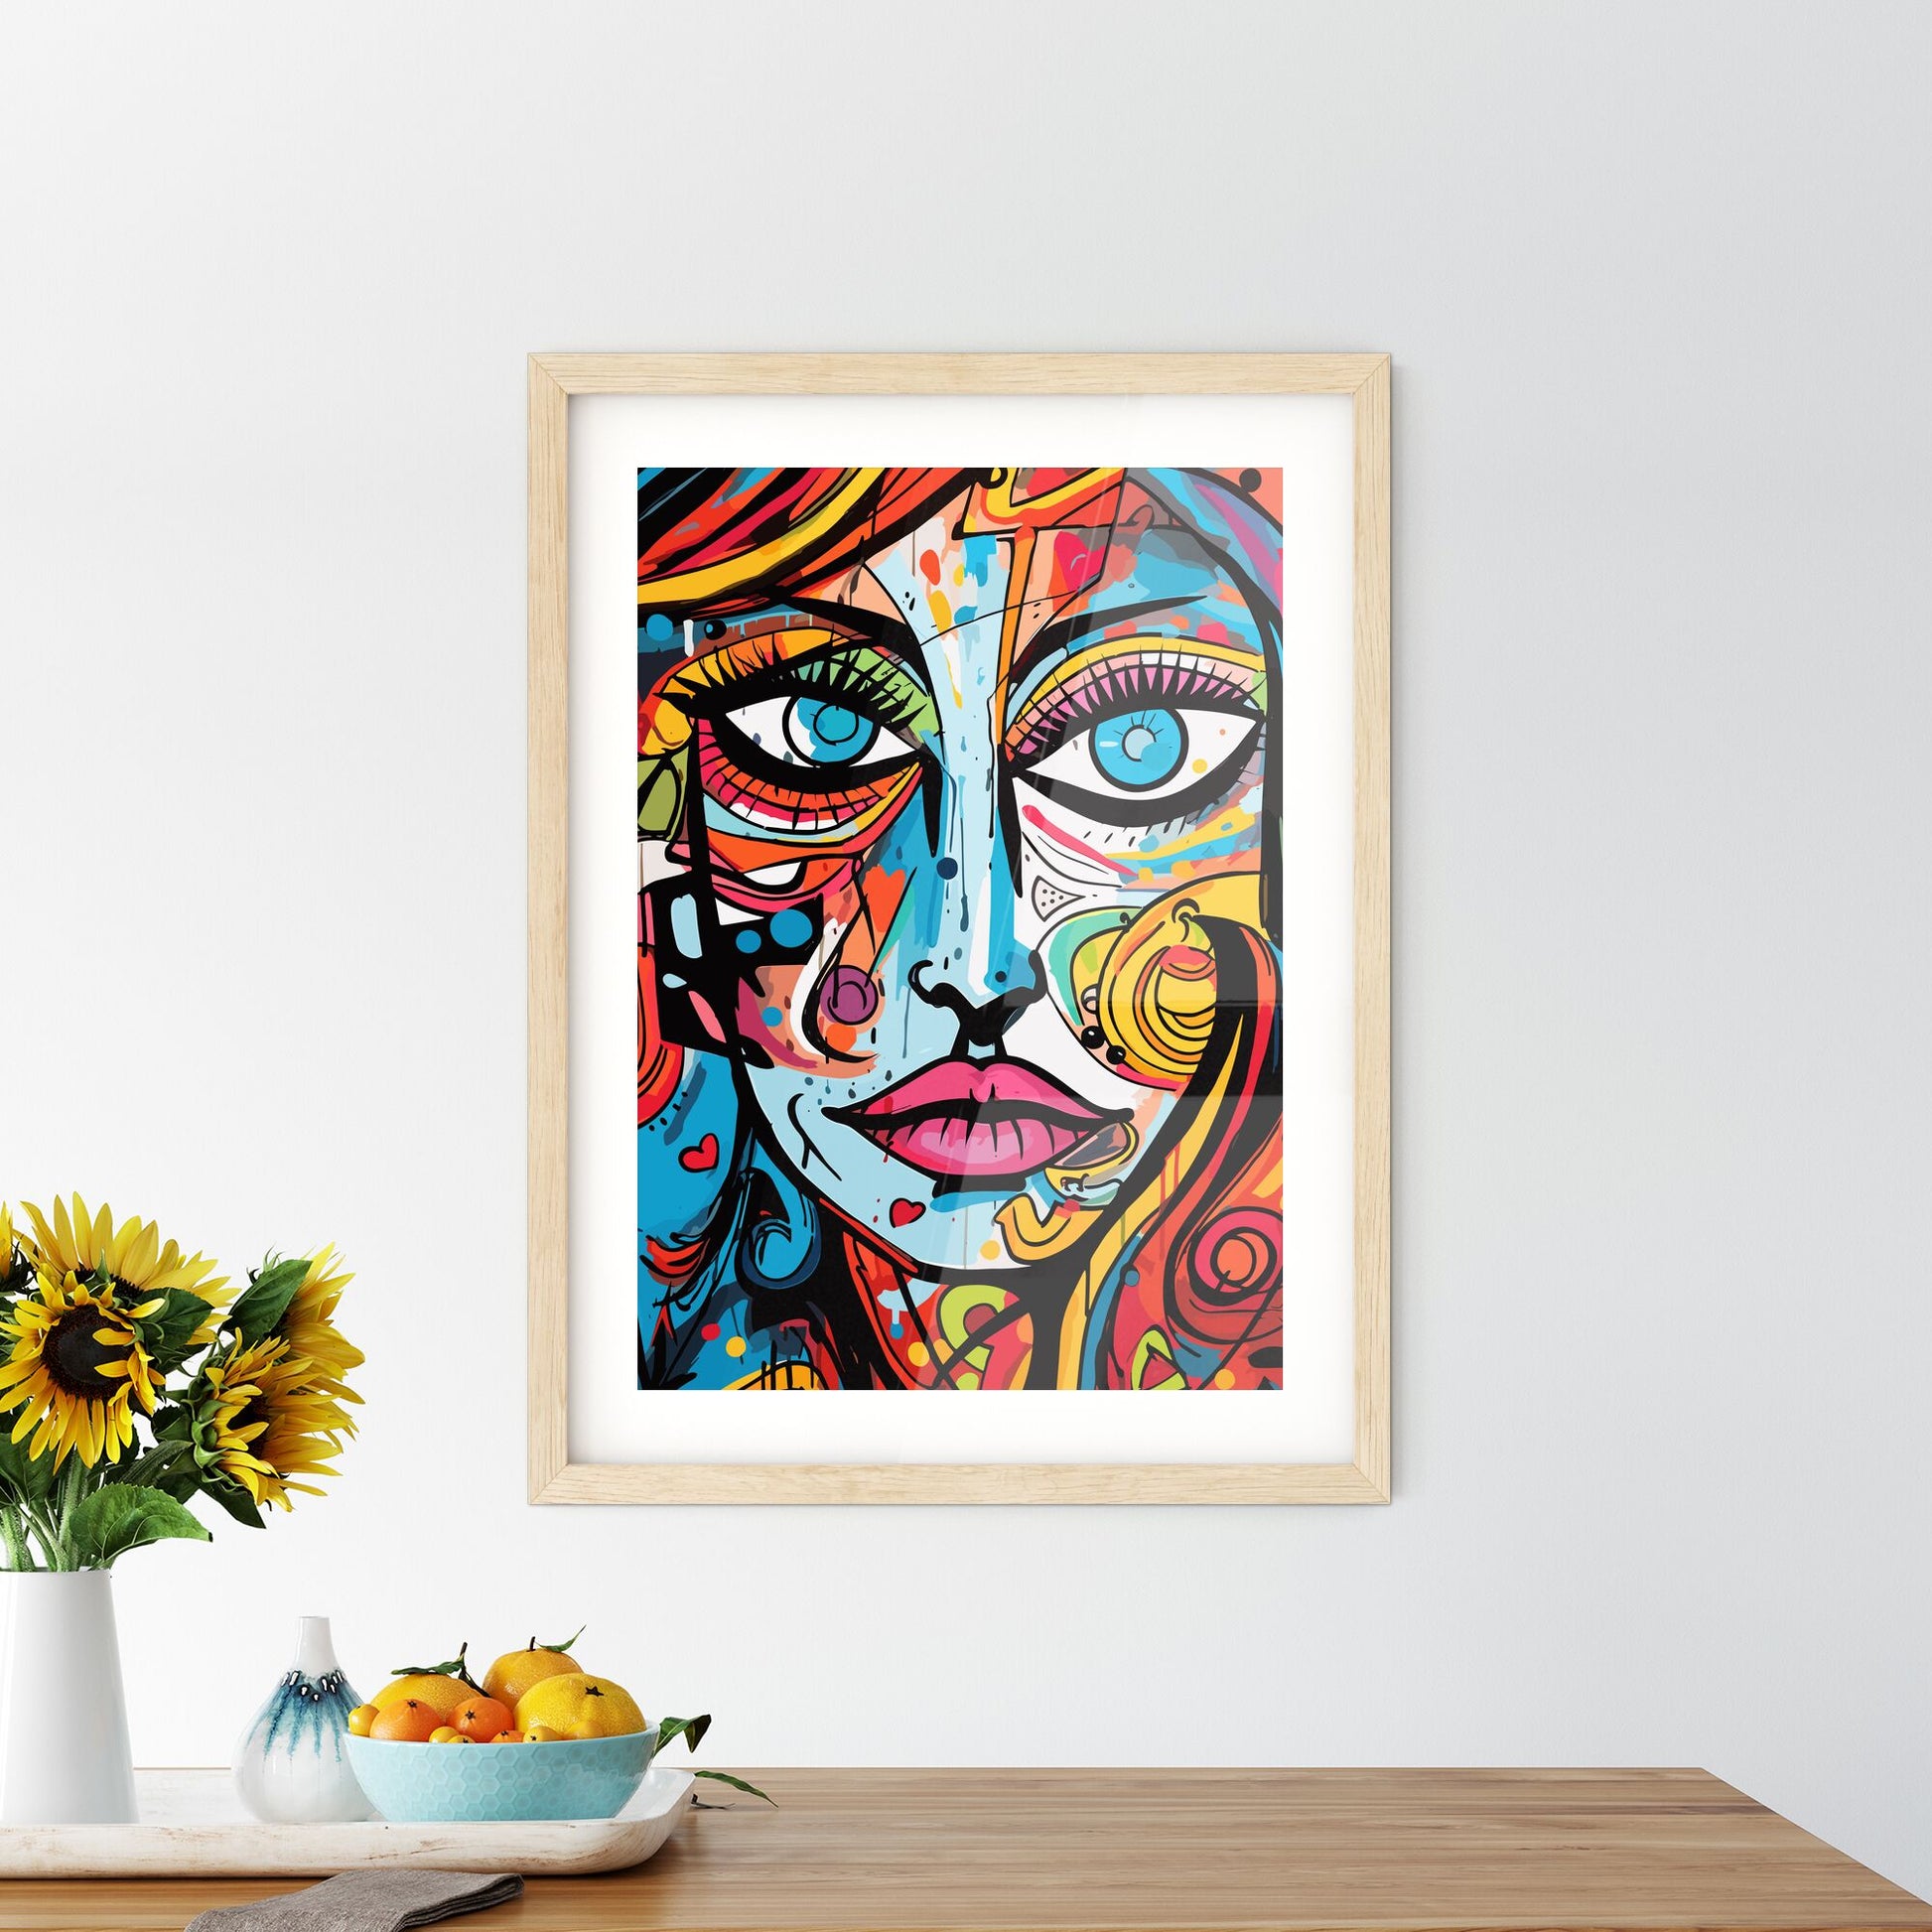 Mother Earth - A Colorful Painting Of A Woman'S Face Default Title